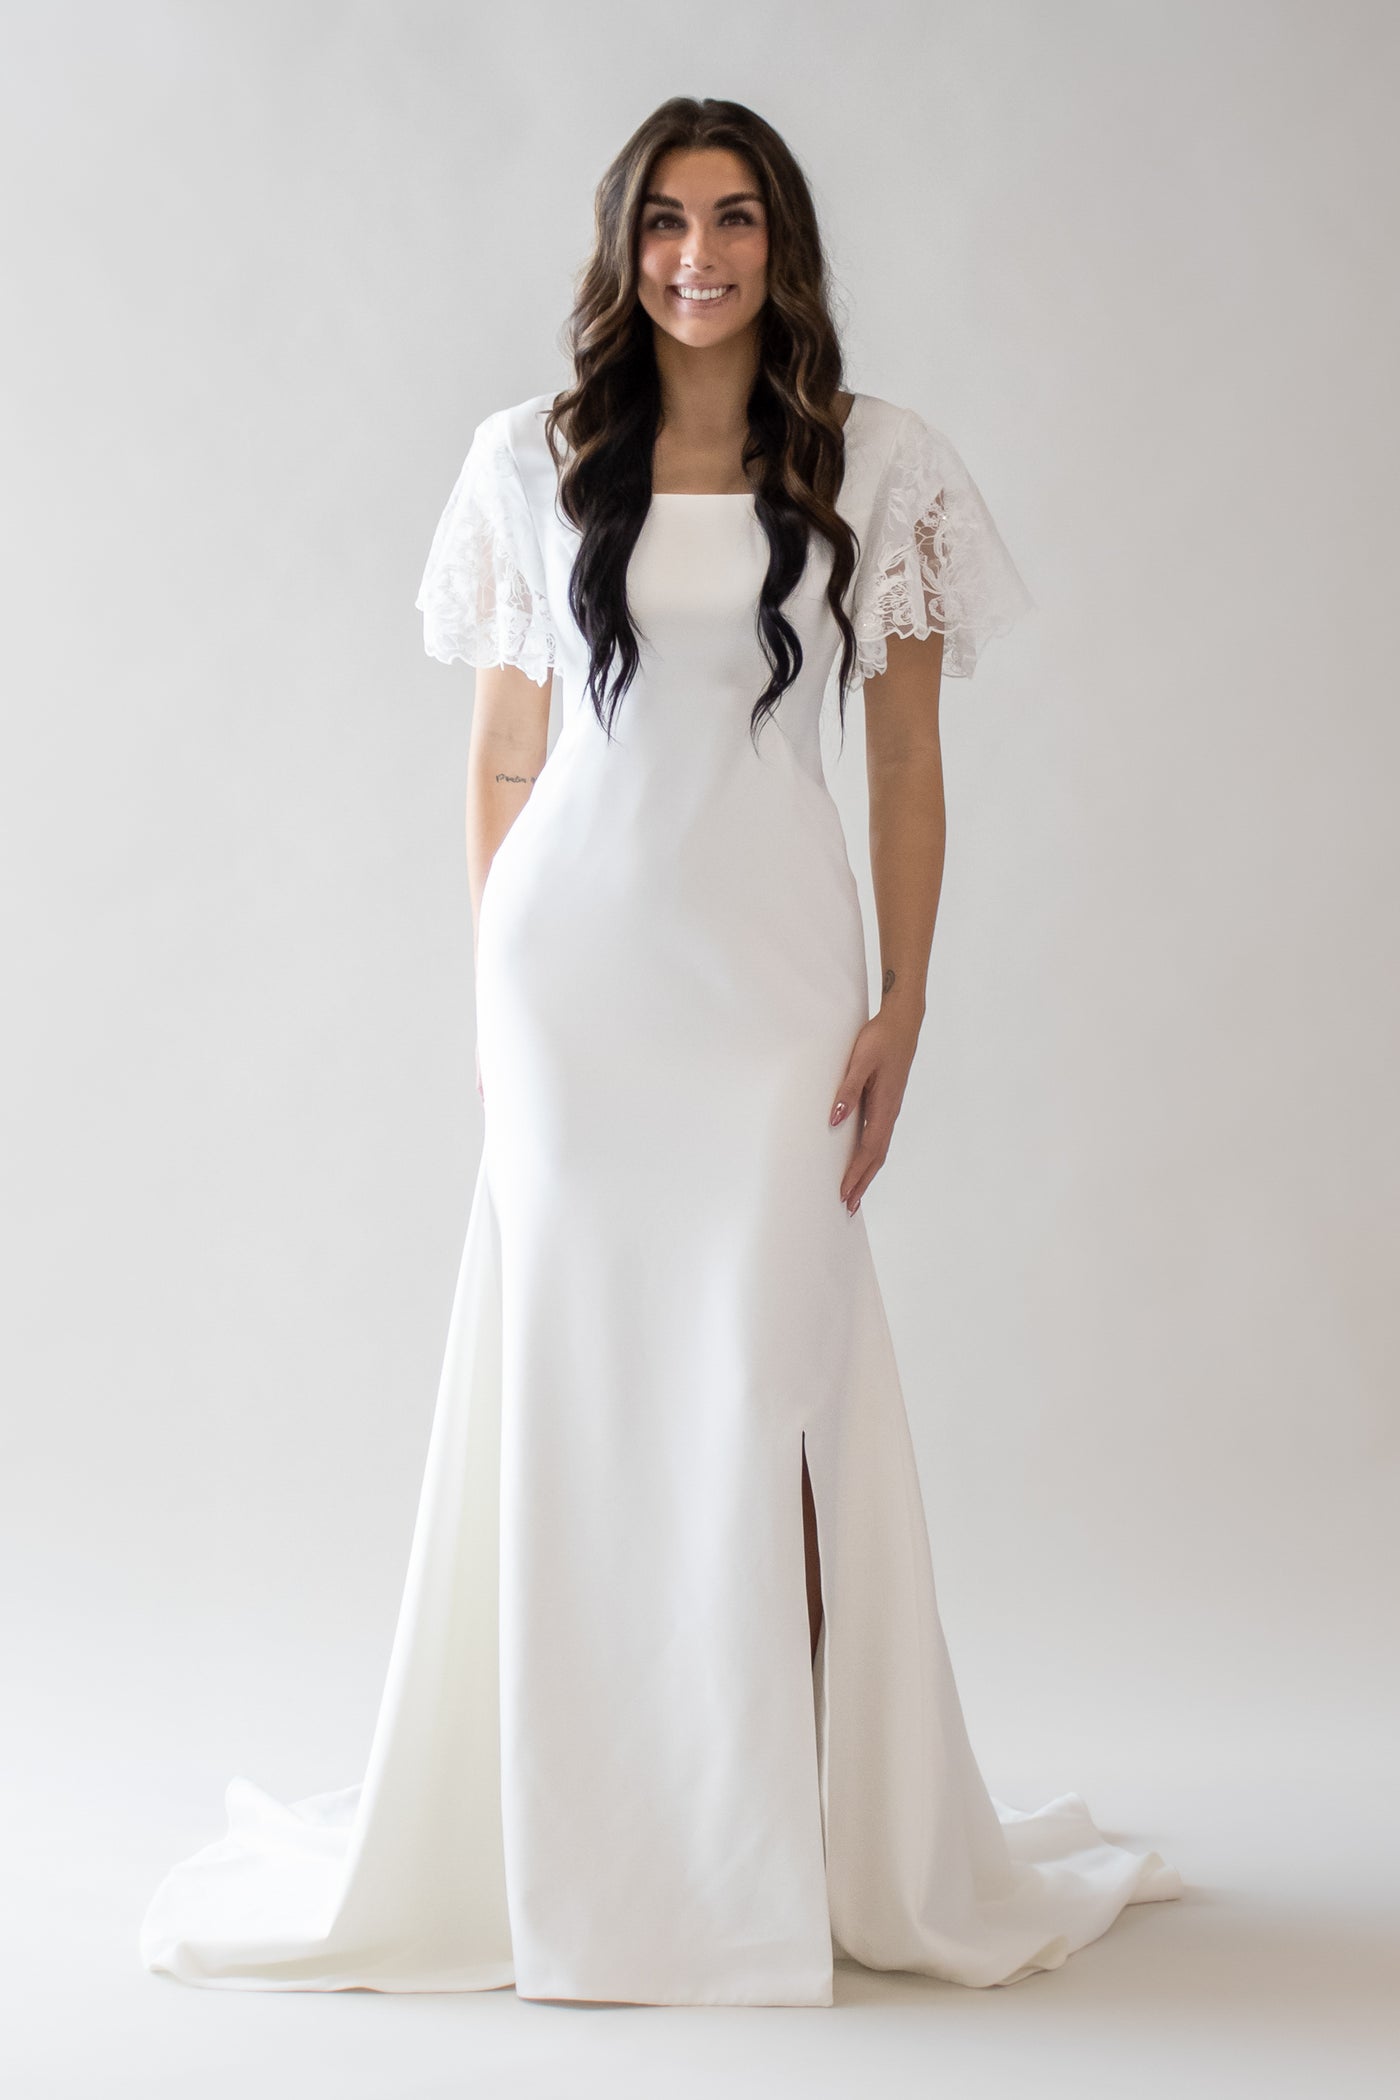 This is a modest wedding dress with a lace flutter sleeve, square neckline, a slit.